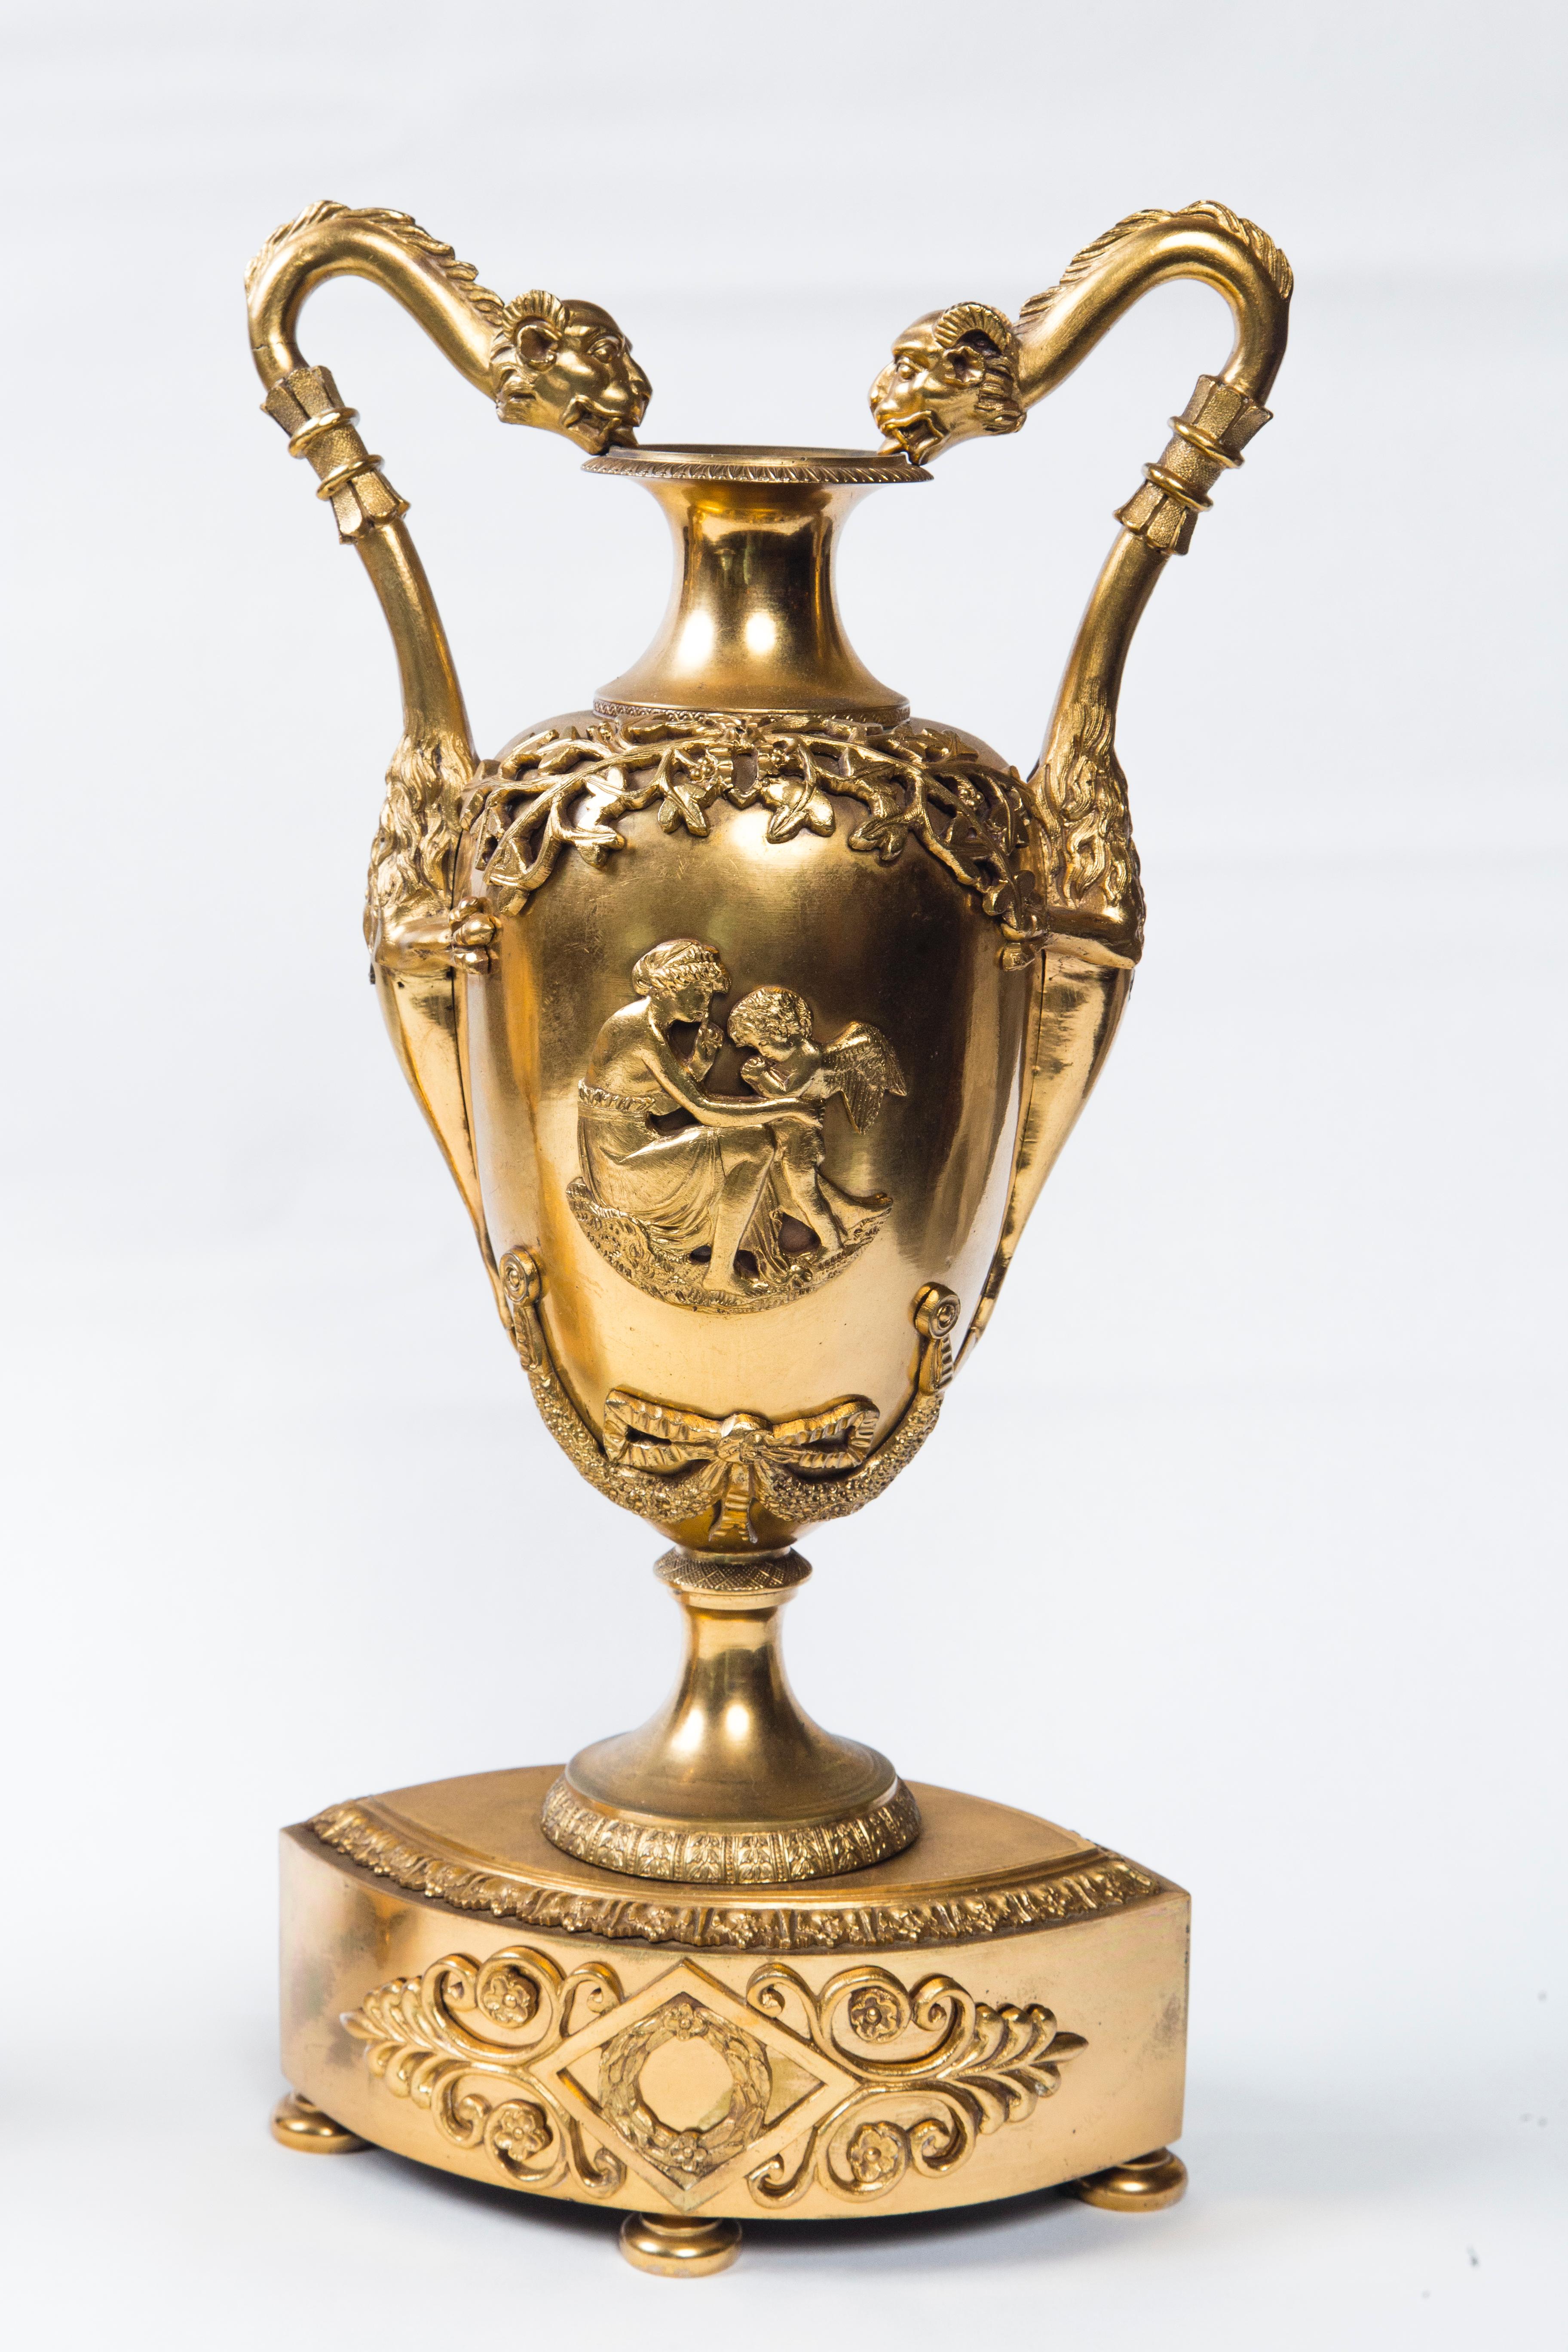 Dating from the early 19th century this pair of sealed top urns have extending dragon heads with rams horns neck handles, hairy mid body with extended 3 toed claw feet grabbing the urn, and ending in arrow pointed tails. Each is decorated with